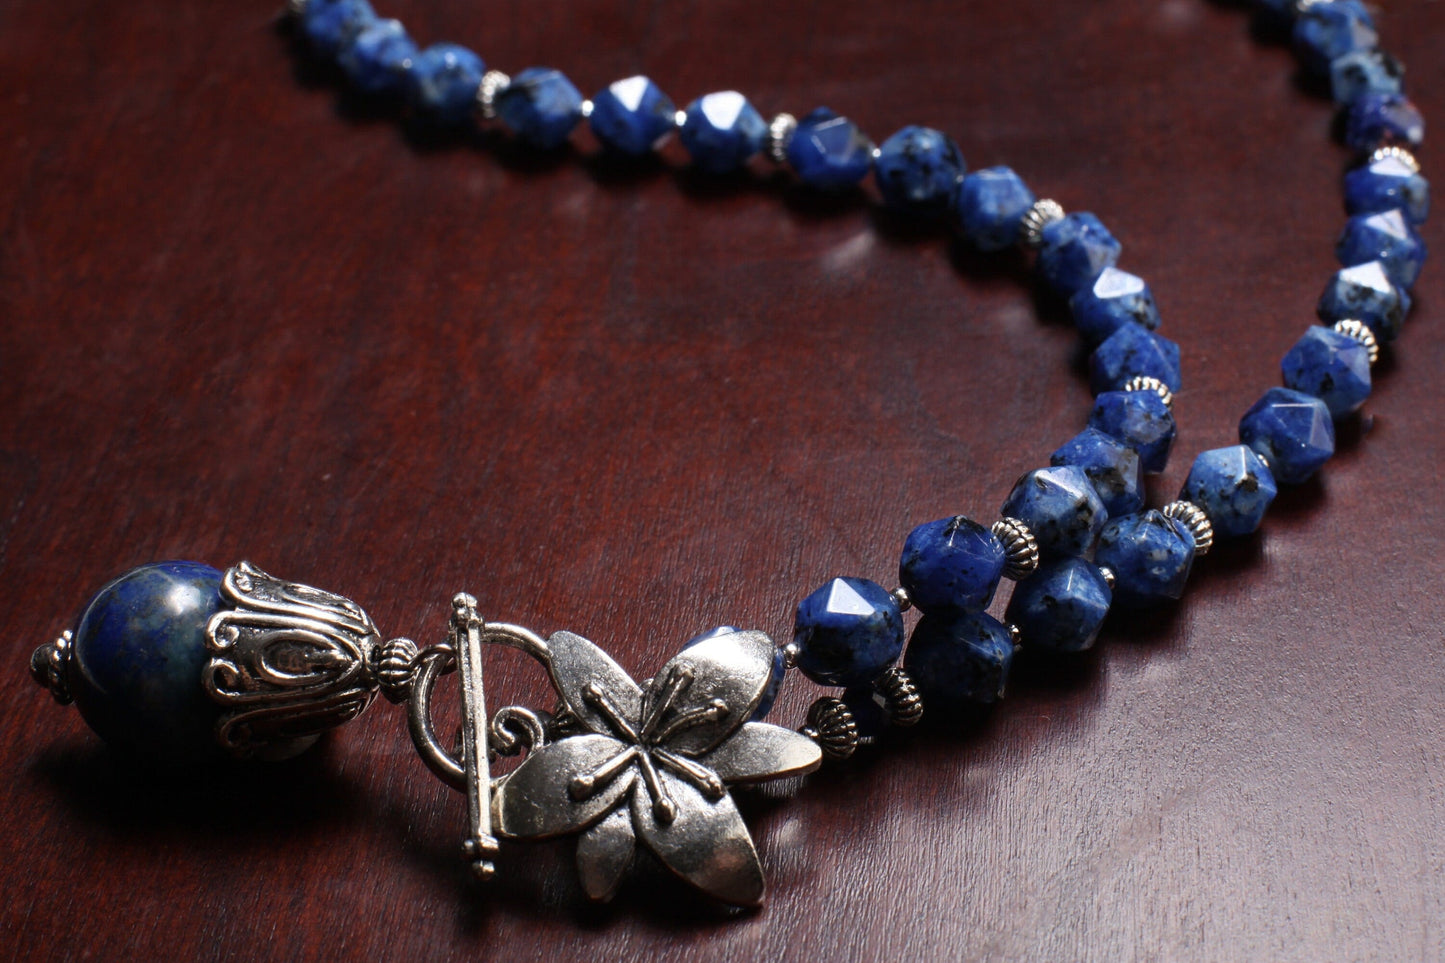 Lapis Lazuli Fancy Cap Pendant with Sodalite Faceted Hexagon Necklace Accented with Bali Style bead and Flower Toggle necklace